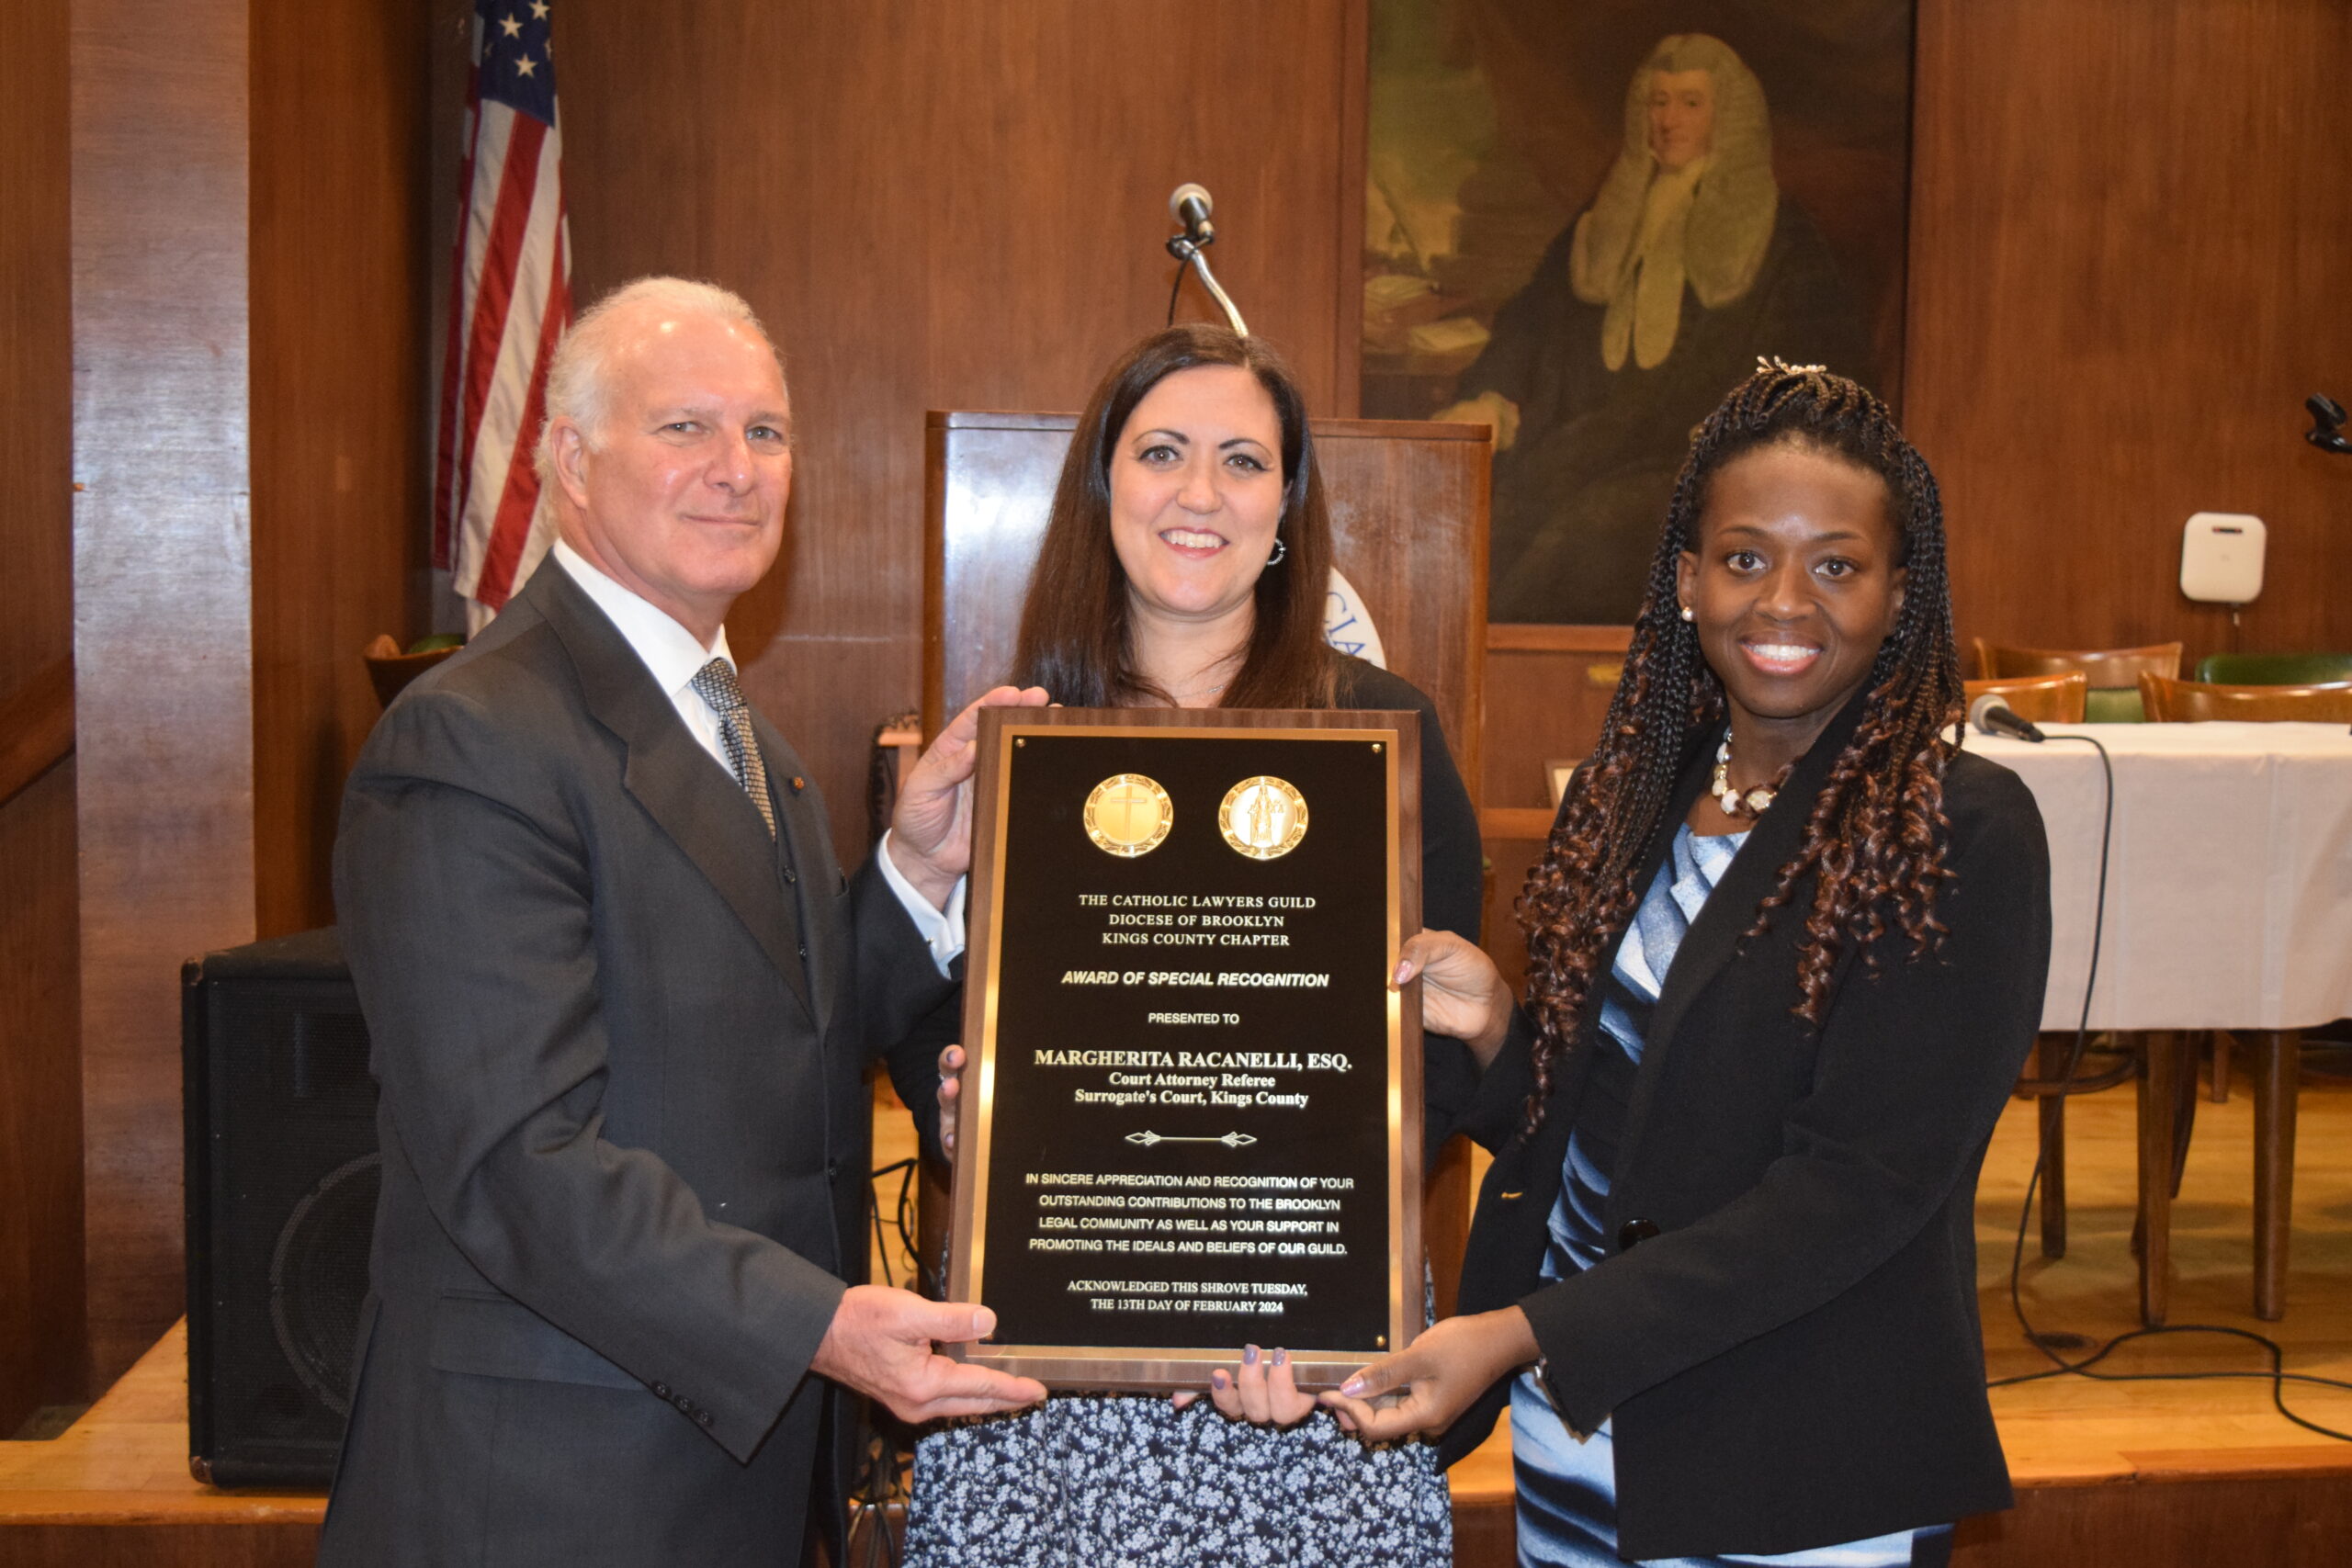 The Catholic Lawyers Guild honored Margherita Racanelli, a court attorney referee in Surrogate’s Court as part of its Shrove Tuesday celebration. Racanelli (center) was presented with a plaque by Gregory Cerchione and Hon. Betsey Jean-Jacques, president of the Guild.Photos: Robert Abruzzese/Brooklyn Eagle